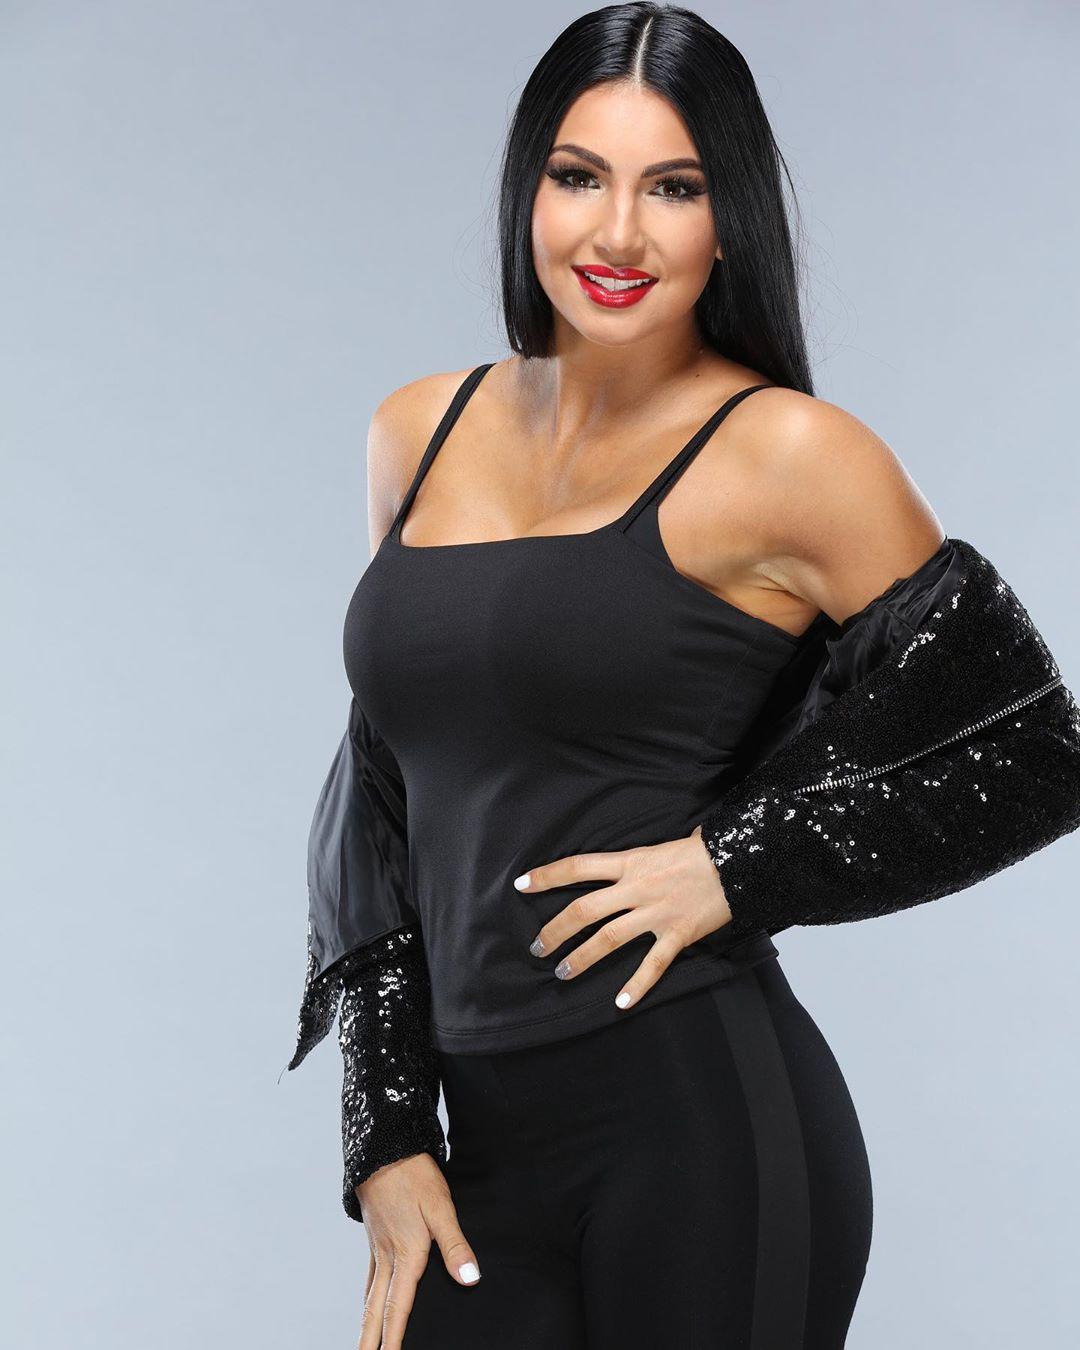 60+ Hot Pictures Of Billie Kay Will Rock The WWE Fan Inside You 5